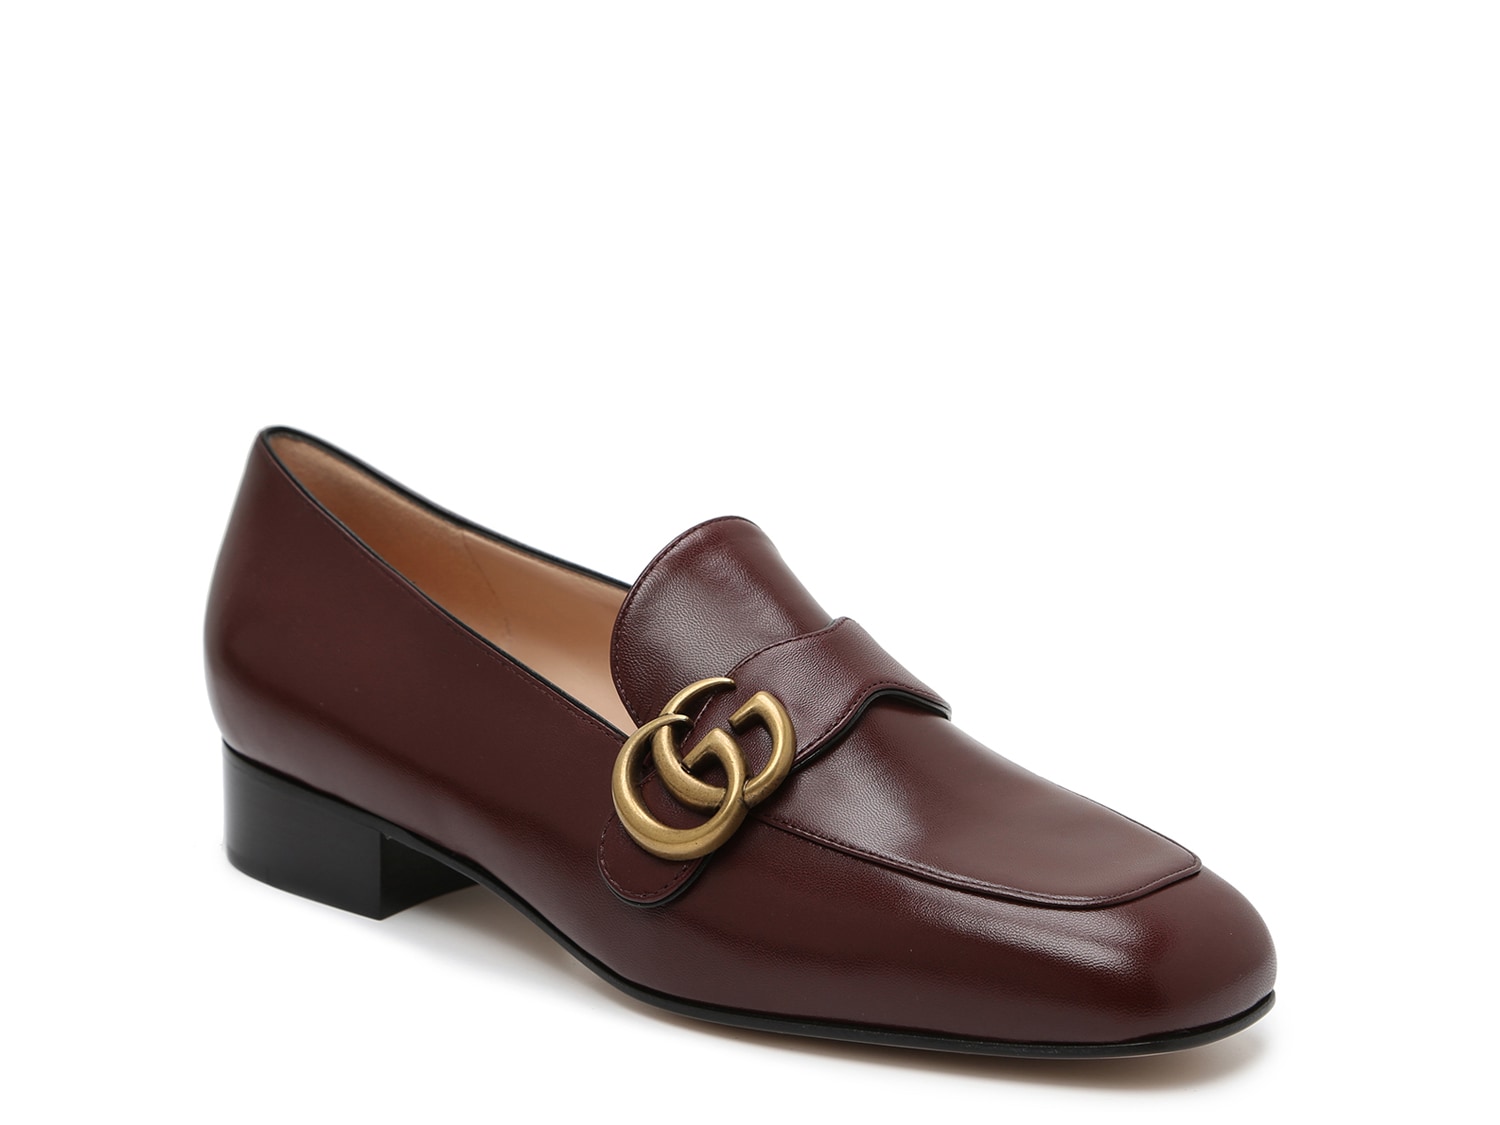 Gucci Marmont 25 Loafer | DSW